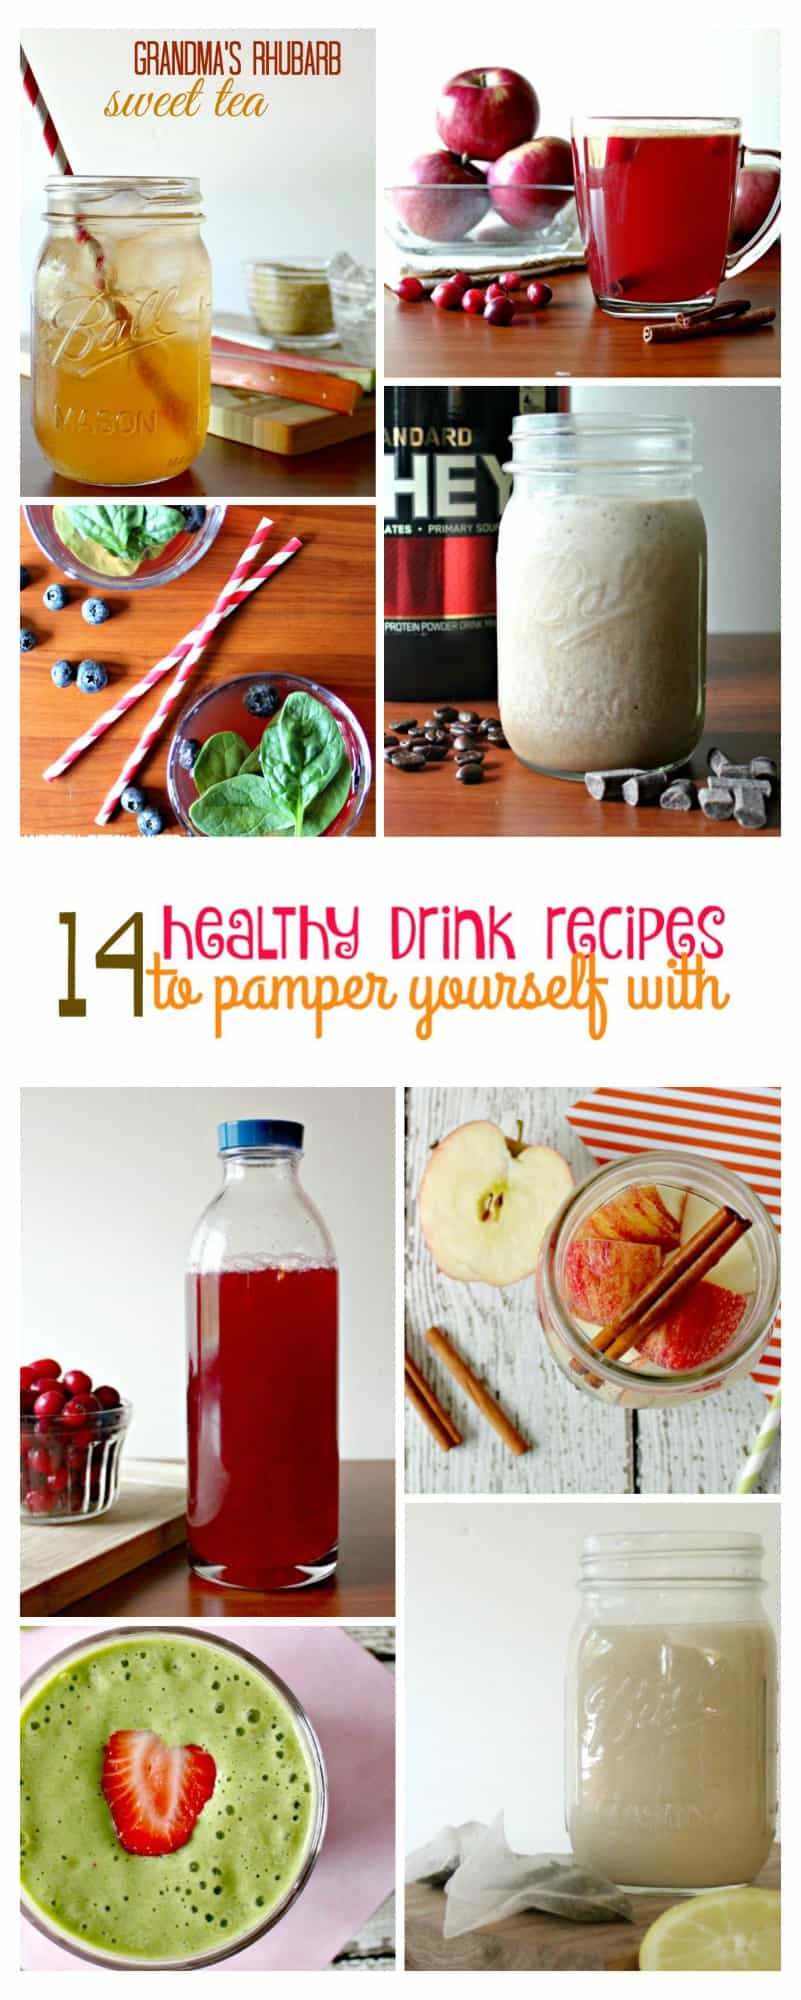 14 healthy drink recipes to pamper yourself with